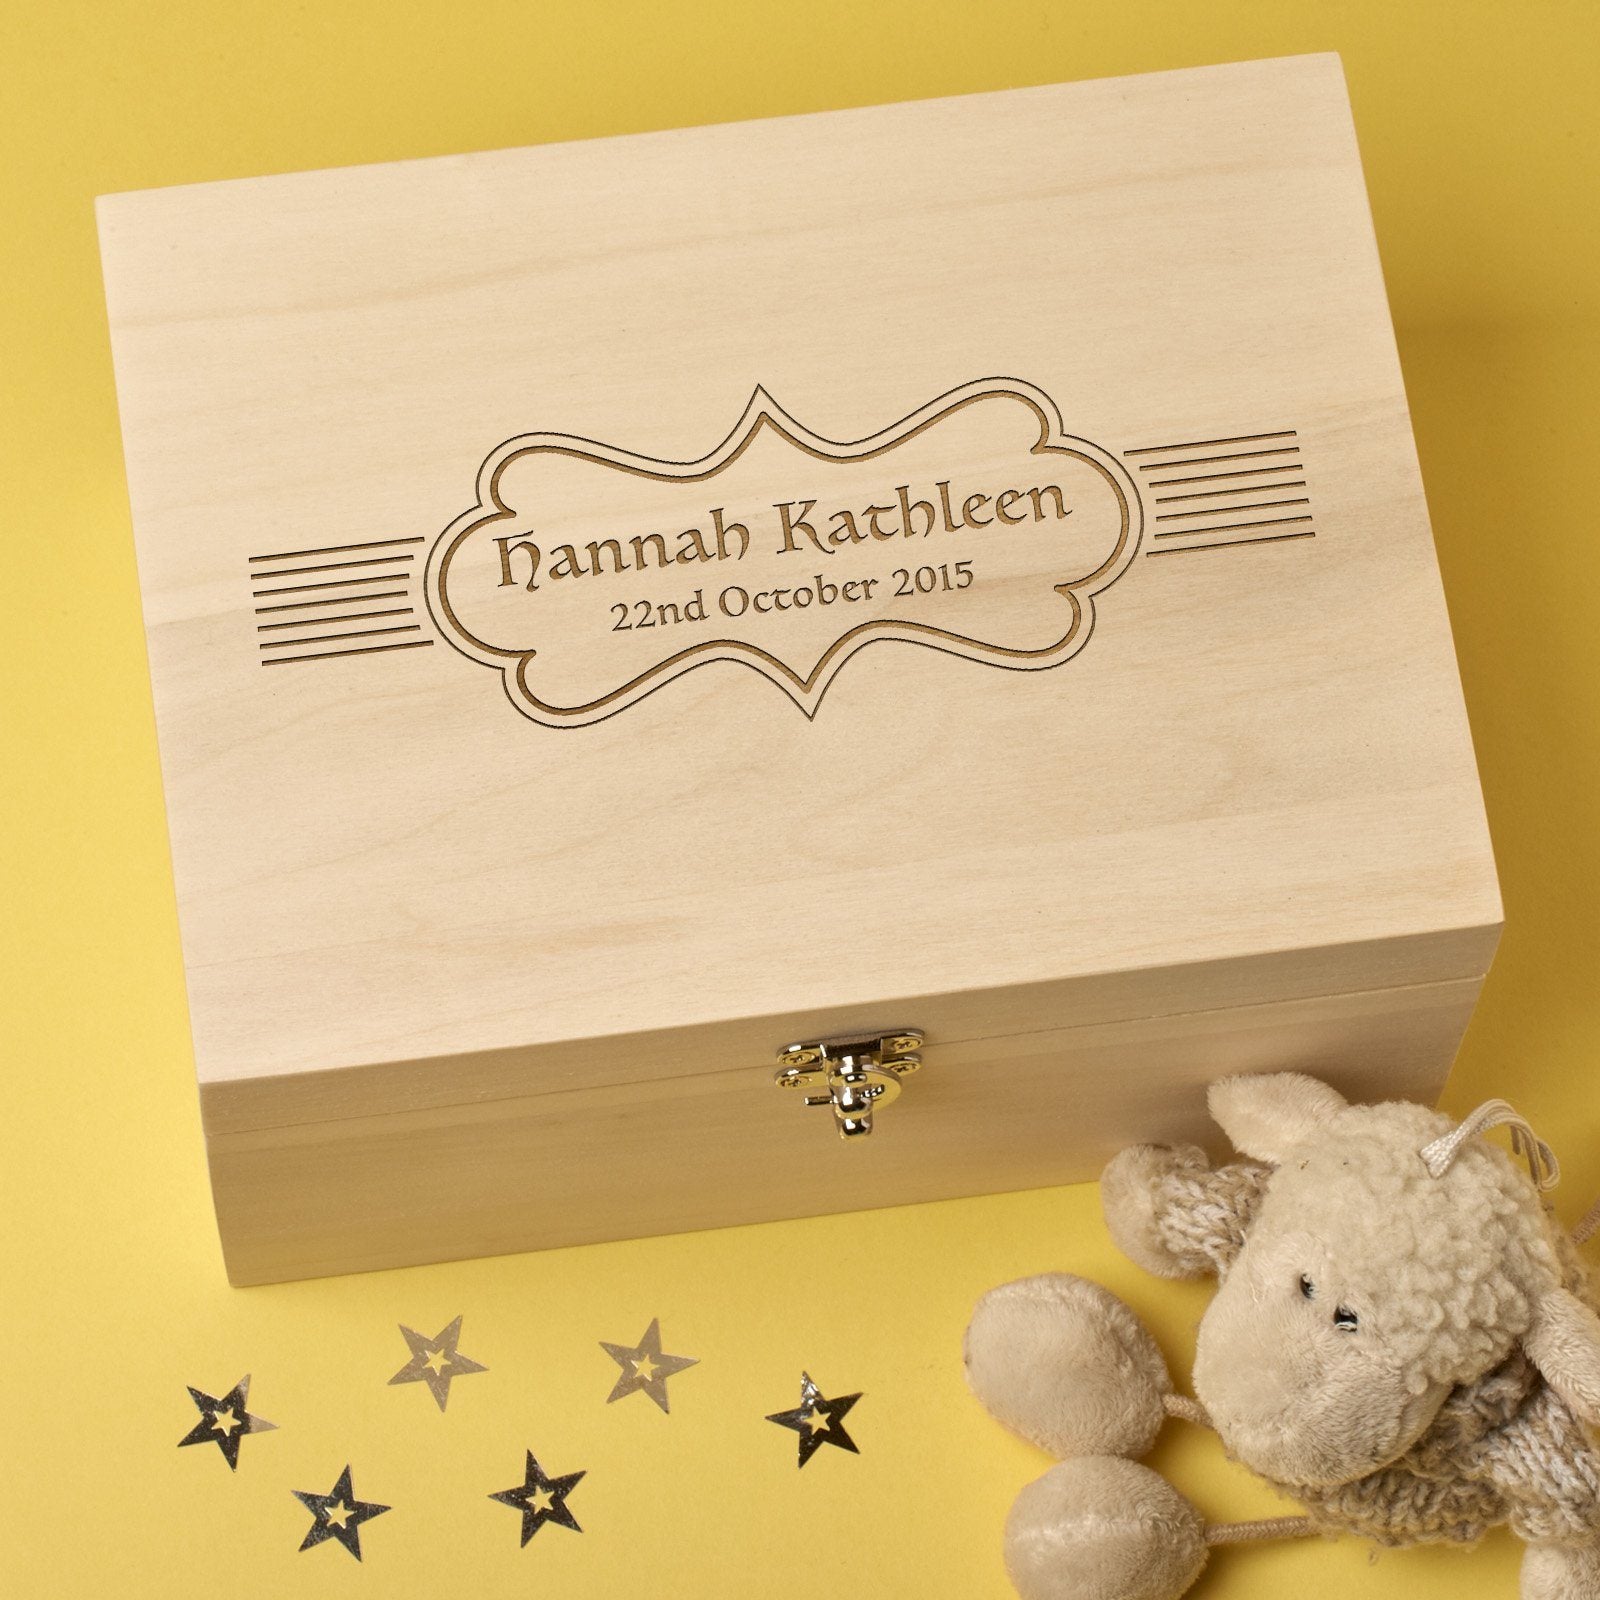 Christening Box - Personalised Laser Engraved Wooden Memory Keepsake Box With Hinged Lid - Name In Lines Design